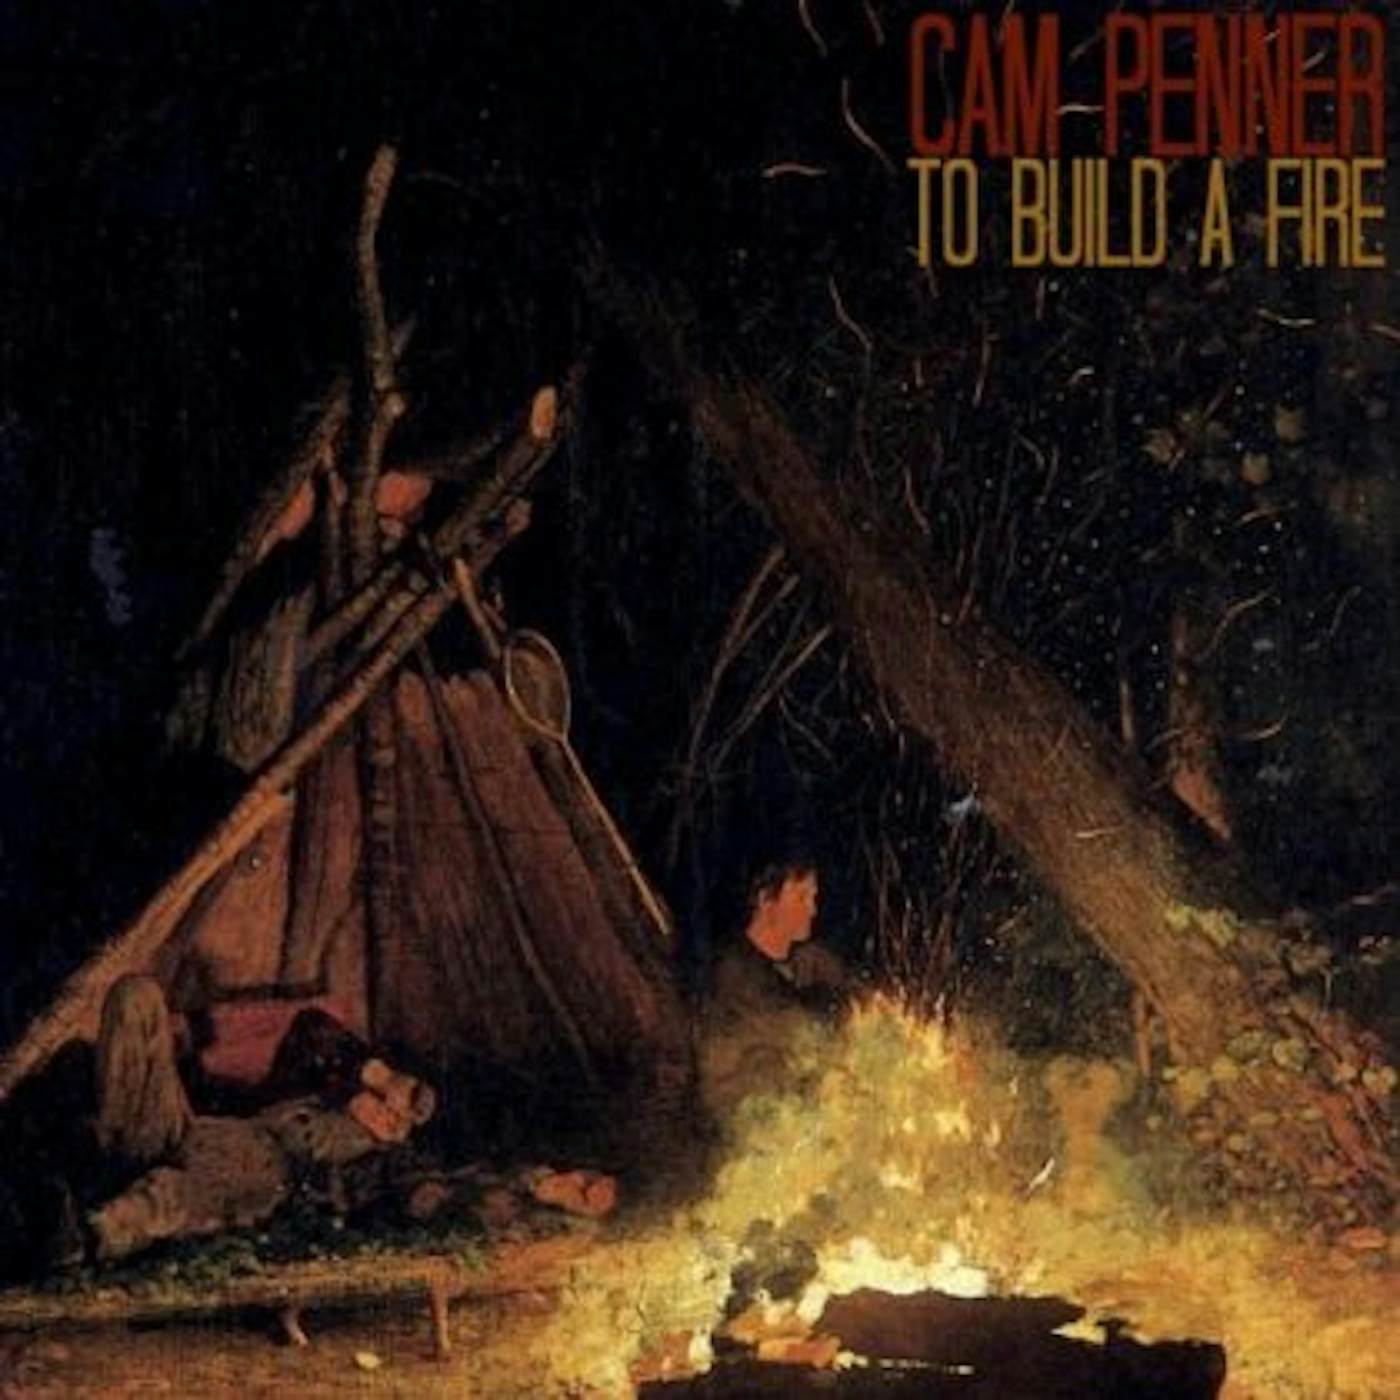 Cam Penner TO BUILD A FIRE CD